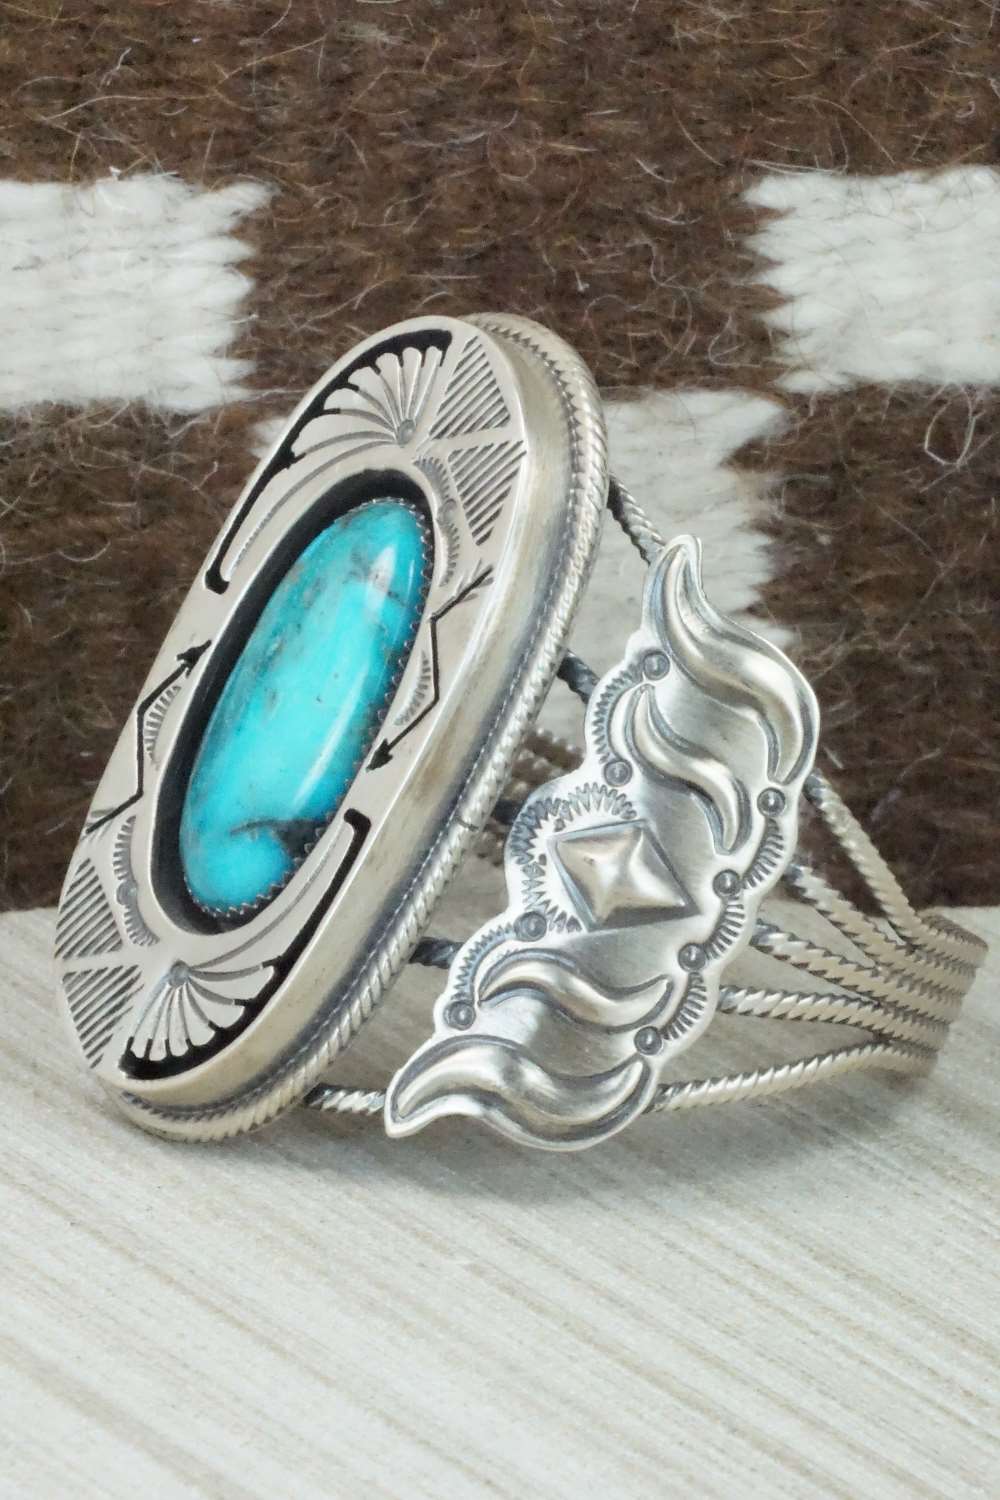 Turquoise and Sterling Silver Bracelet - Navajo